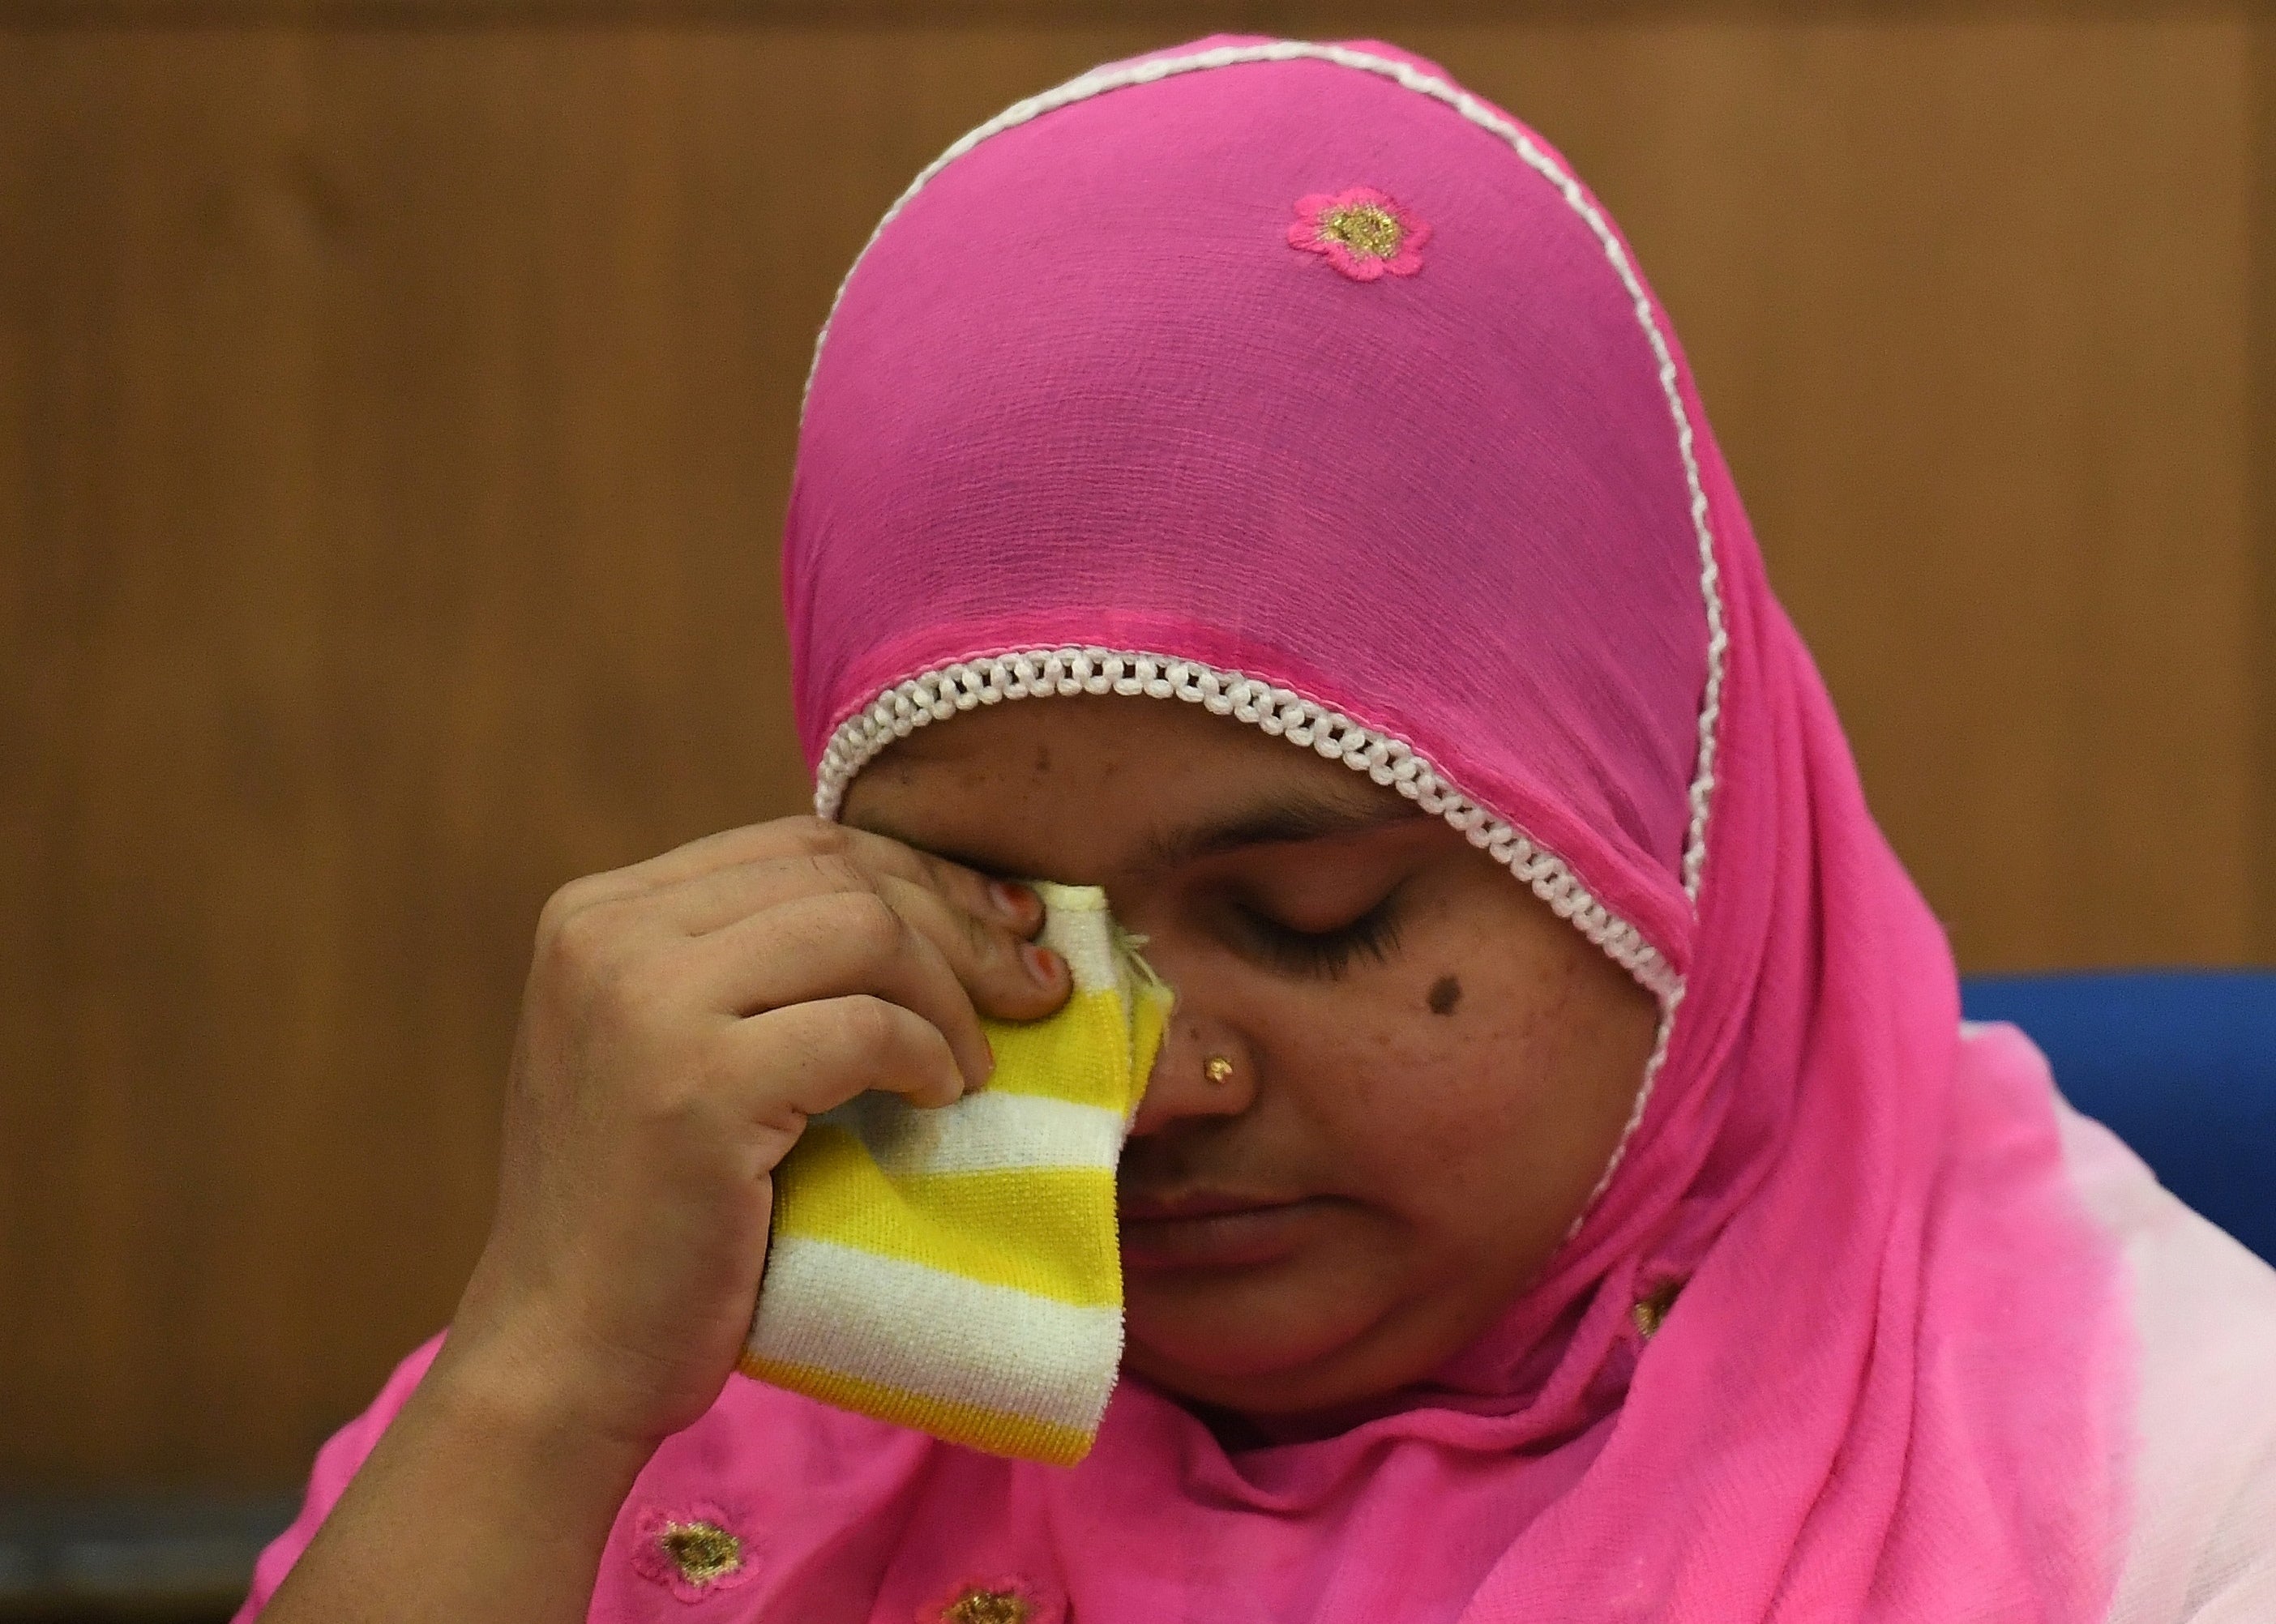 Indian rape survivor Bilkis Bano reacts during a press conference in Delhi on 8 May 2017